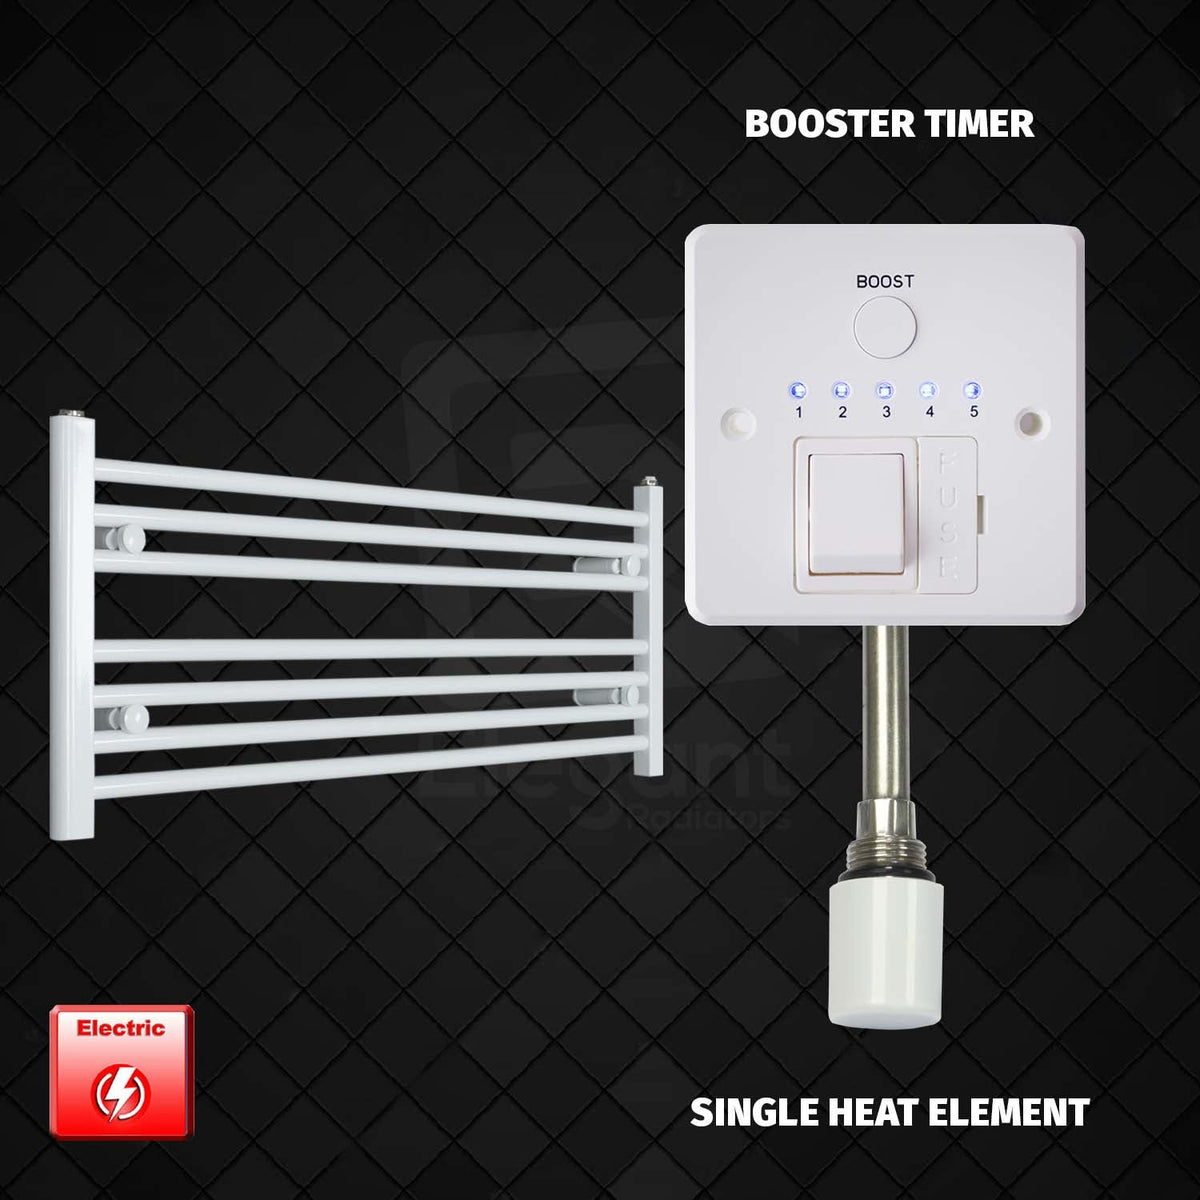 400 mm High 1100 mm Wide Pre-Filled Electric Heated Towel Rail Radiator White HTR Single heat element Booster timer